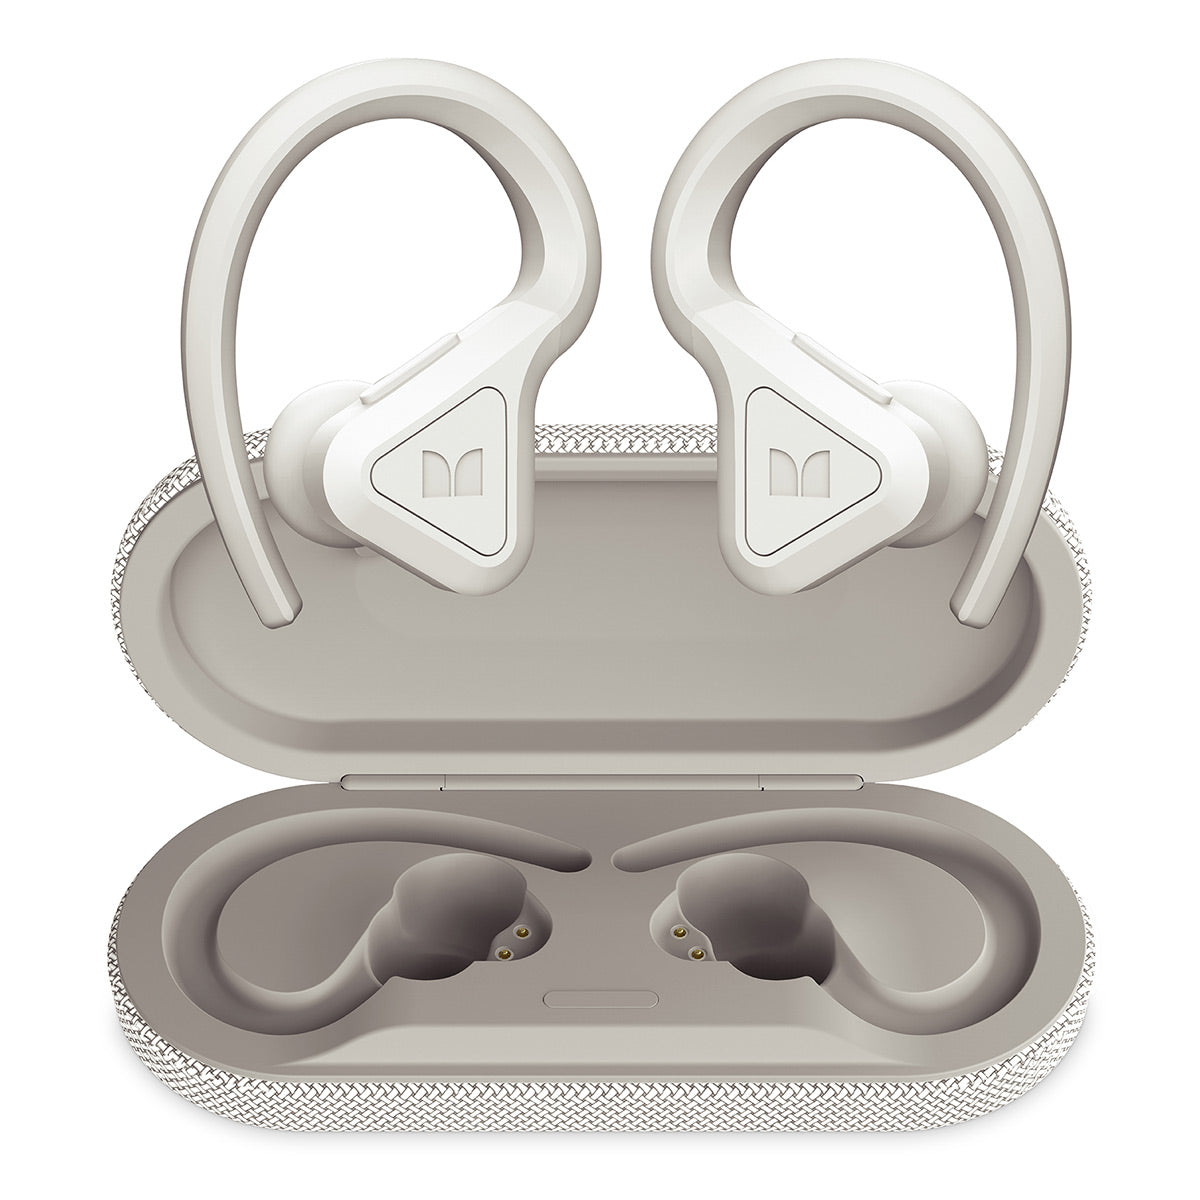 Monster DNA Fit True Wireless Earbuds with Active Noise Cancellation, aptX Lossless Audio, IPX5 Rating, & Qi Wireless Charging Case (White)